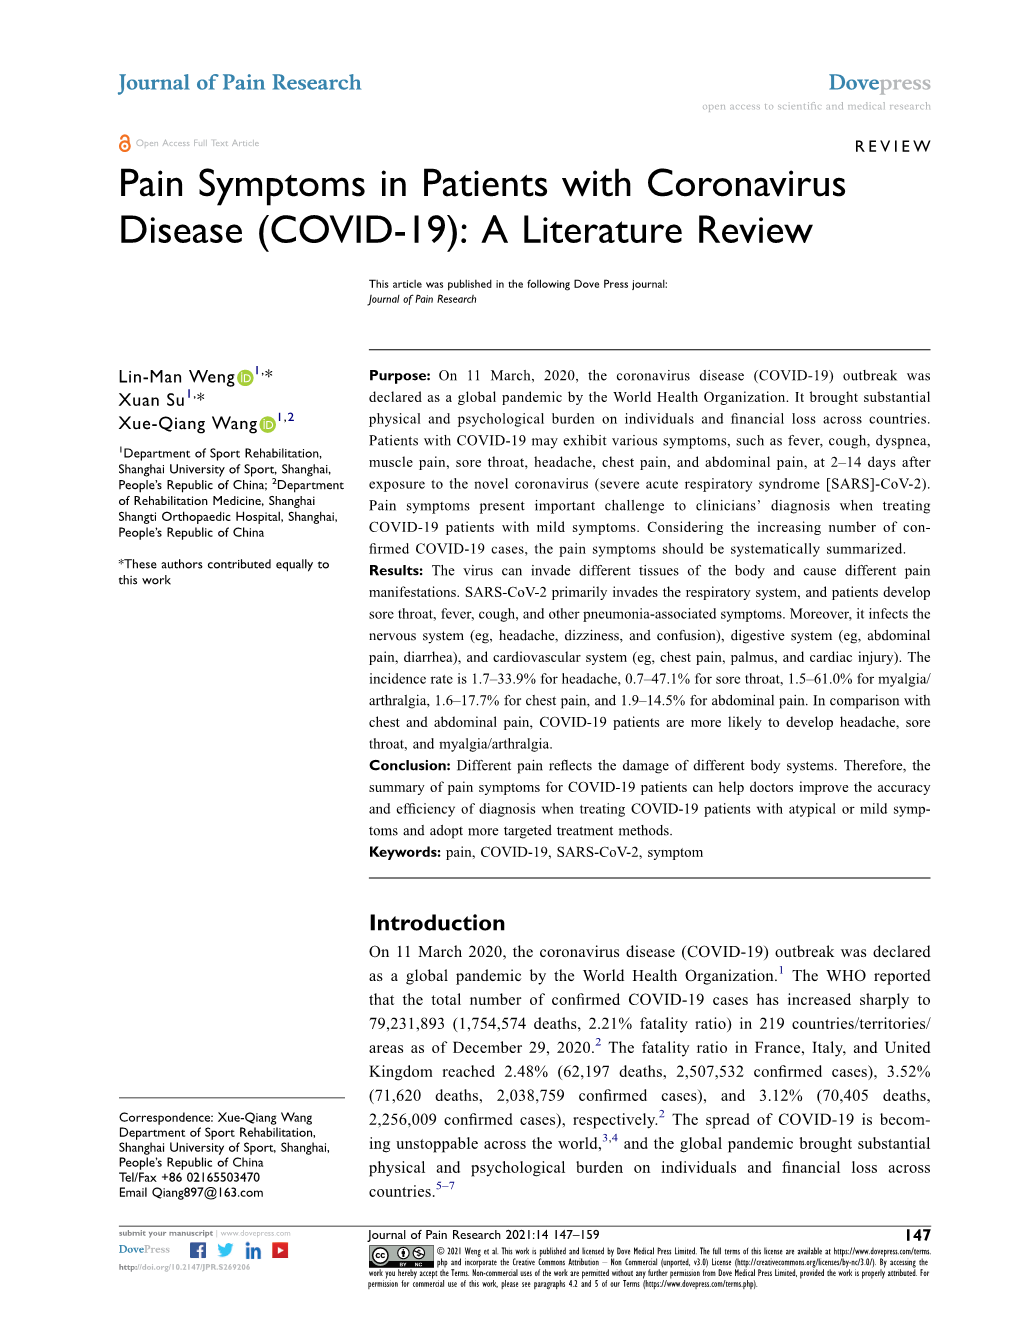 Pain Symptoms in Patients with Coronavirus Disease (COVID-19): a Literature Review